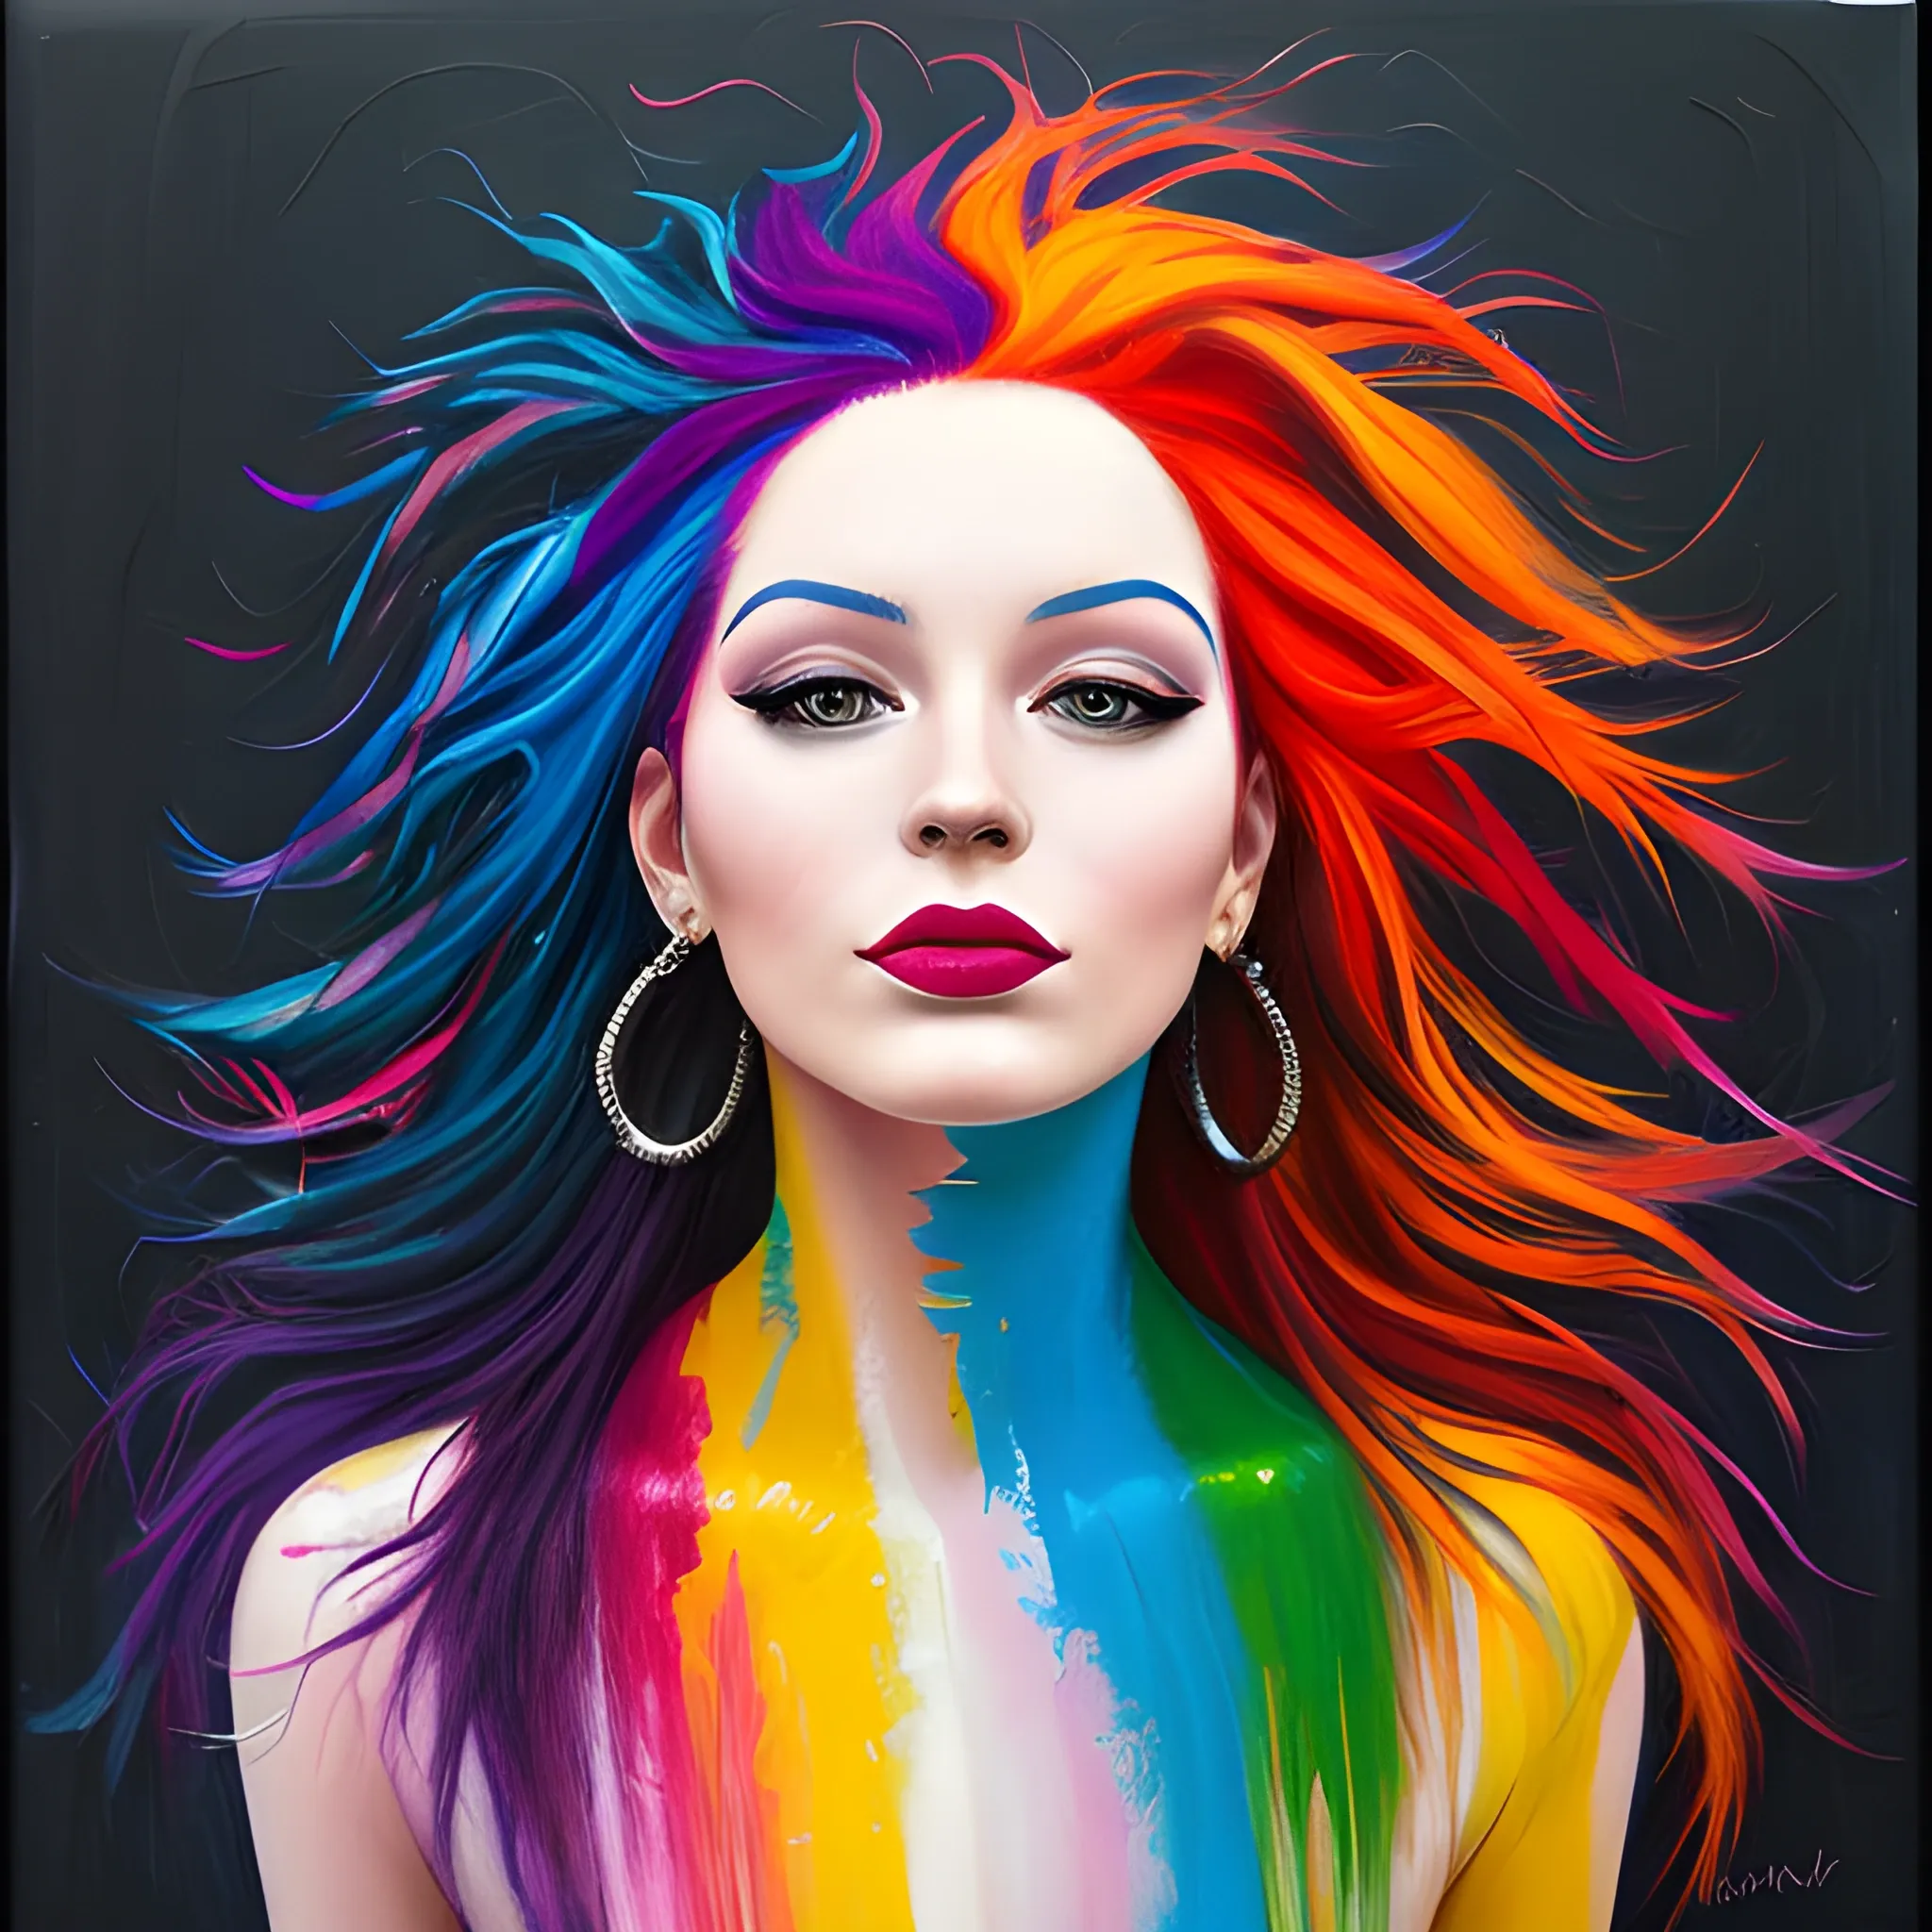 the woman is wearing multicolored hair, vibrant color scheme, Oil Painting